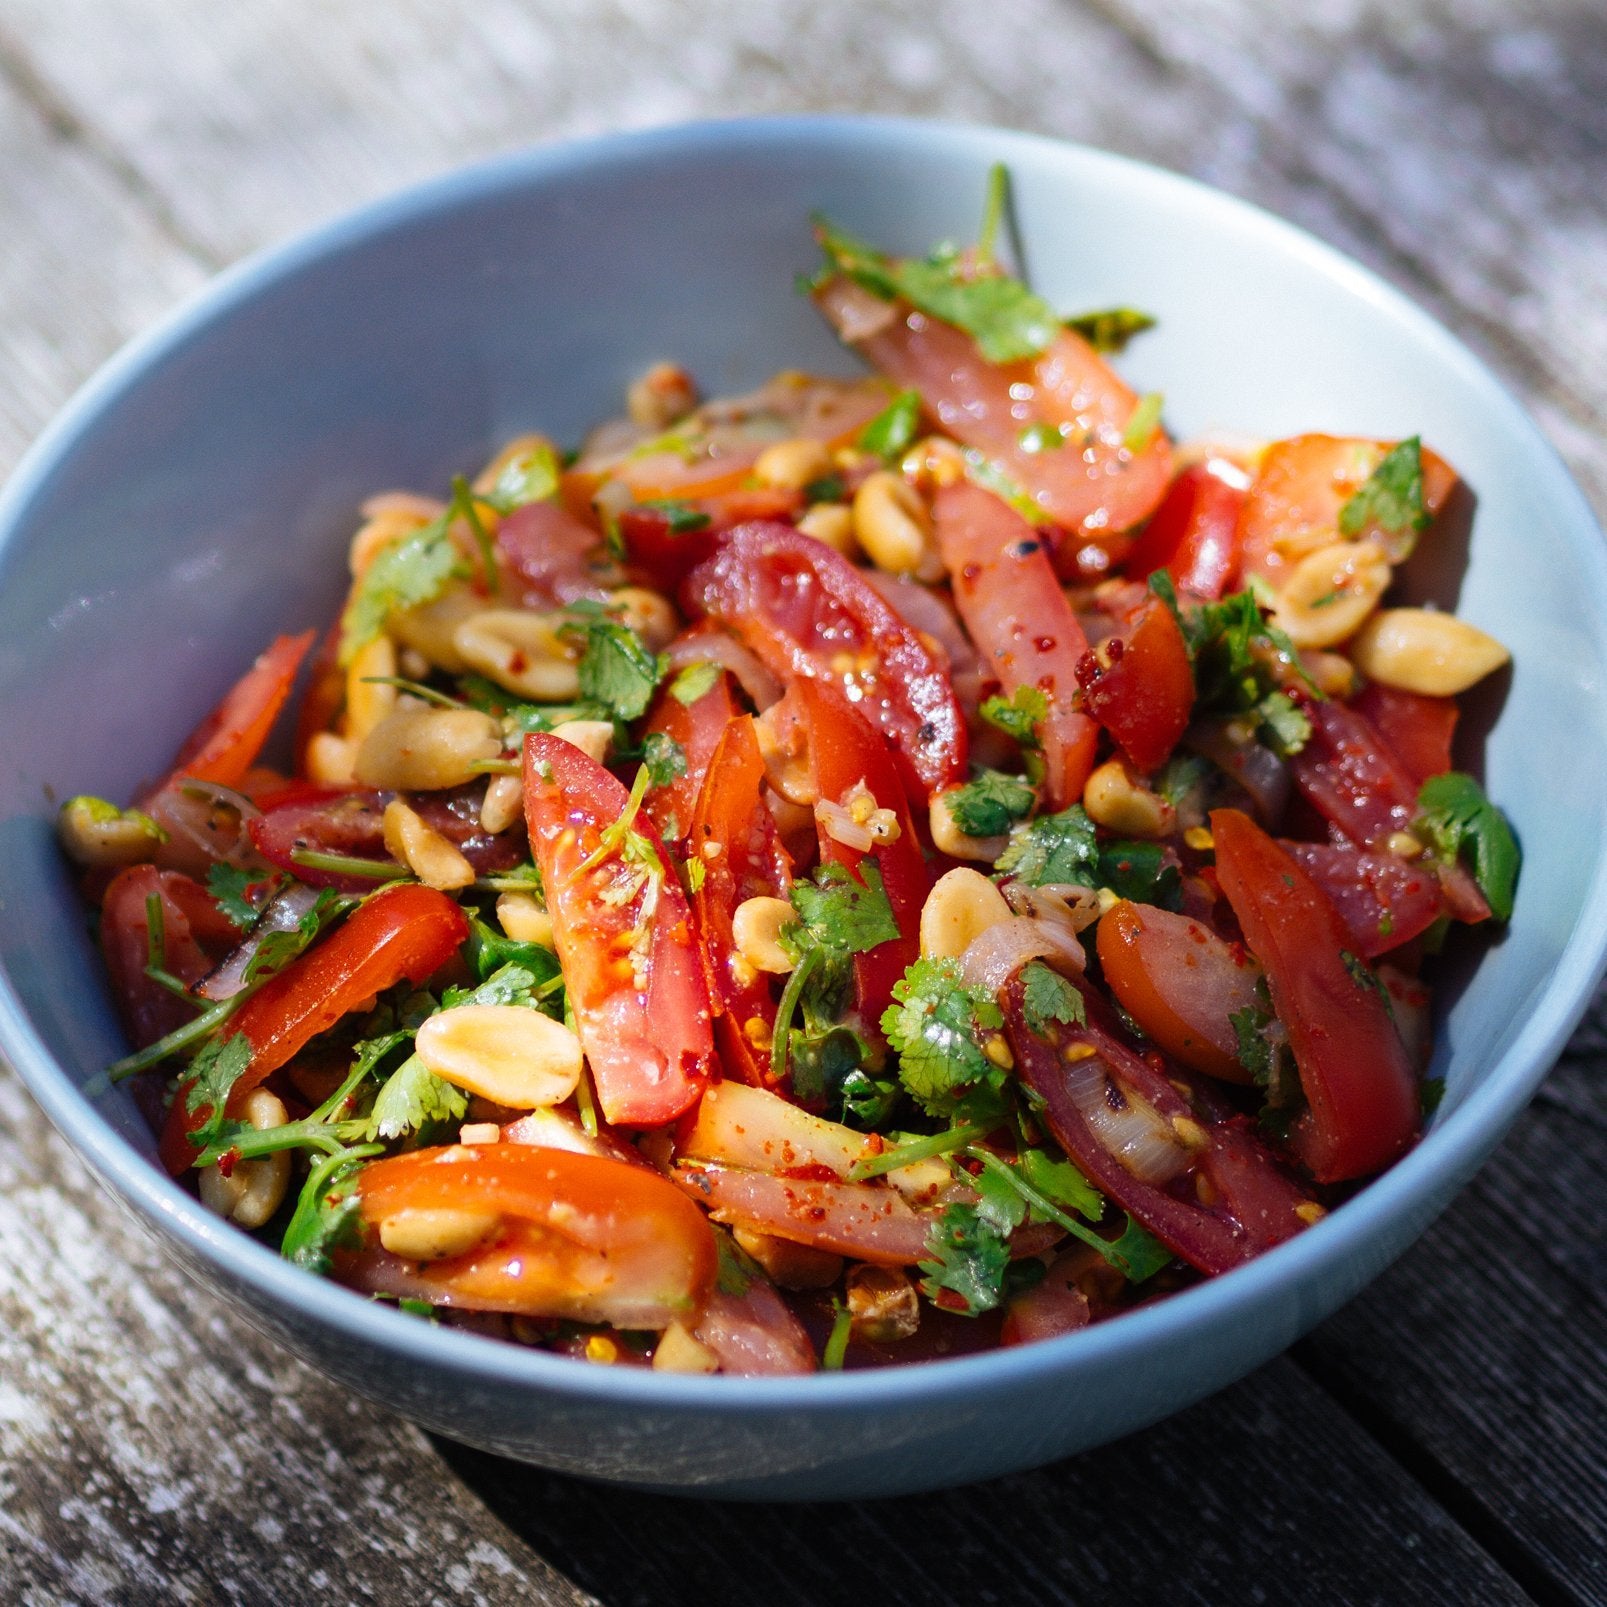 Burmese Tomato Salad Recipe - with Peanuts, Lime and Coriander - YGN Collective